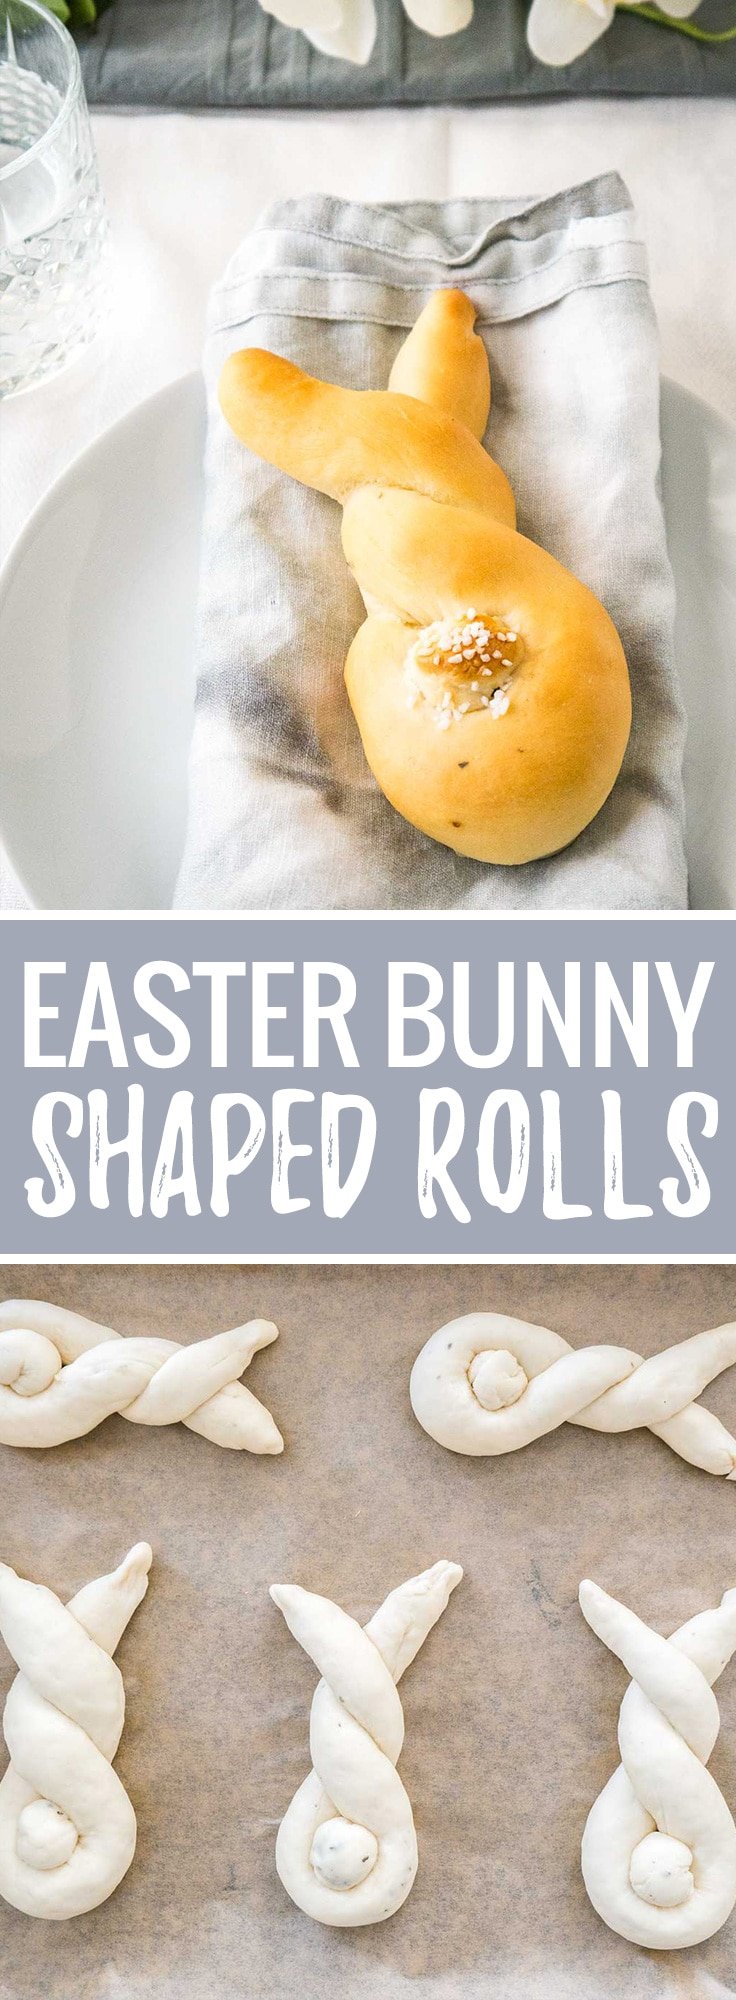 Homemade Easter Bunny Rolls - Plated Cravings